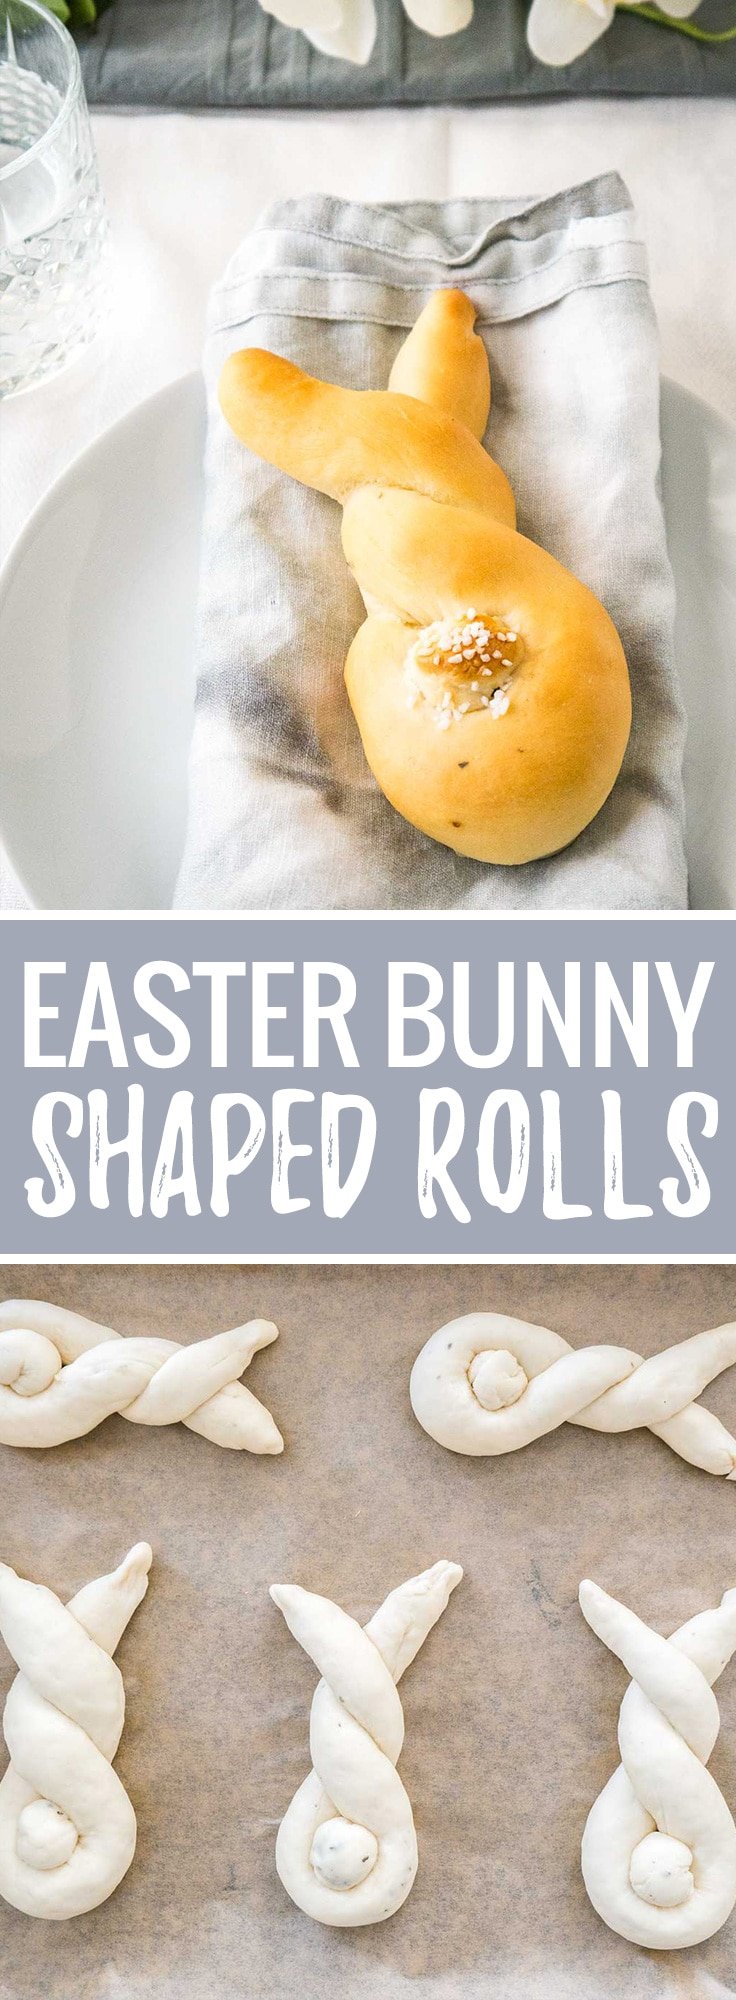 Homemade Easter Bunny Rolls - Plated Cravings